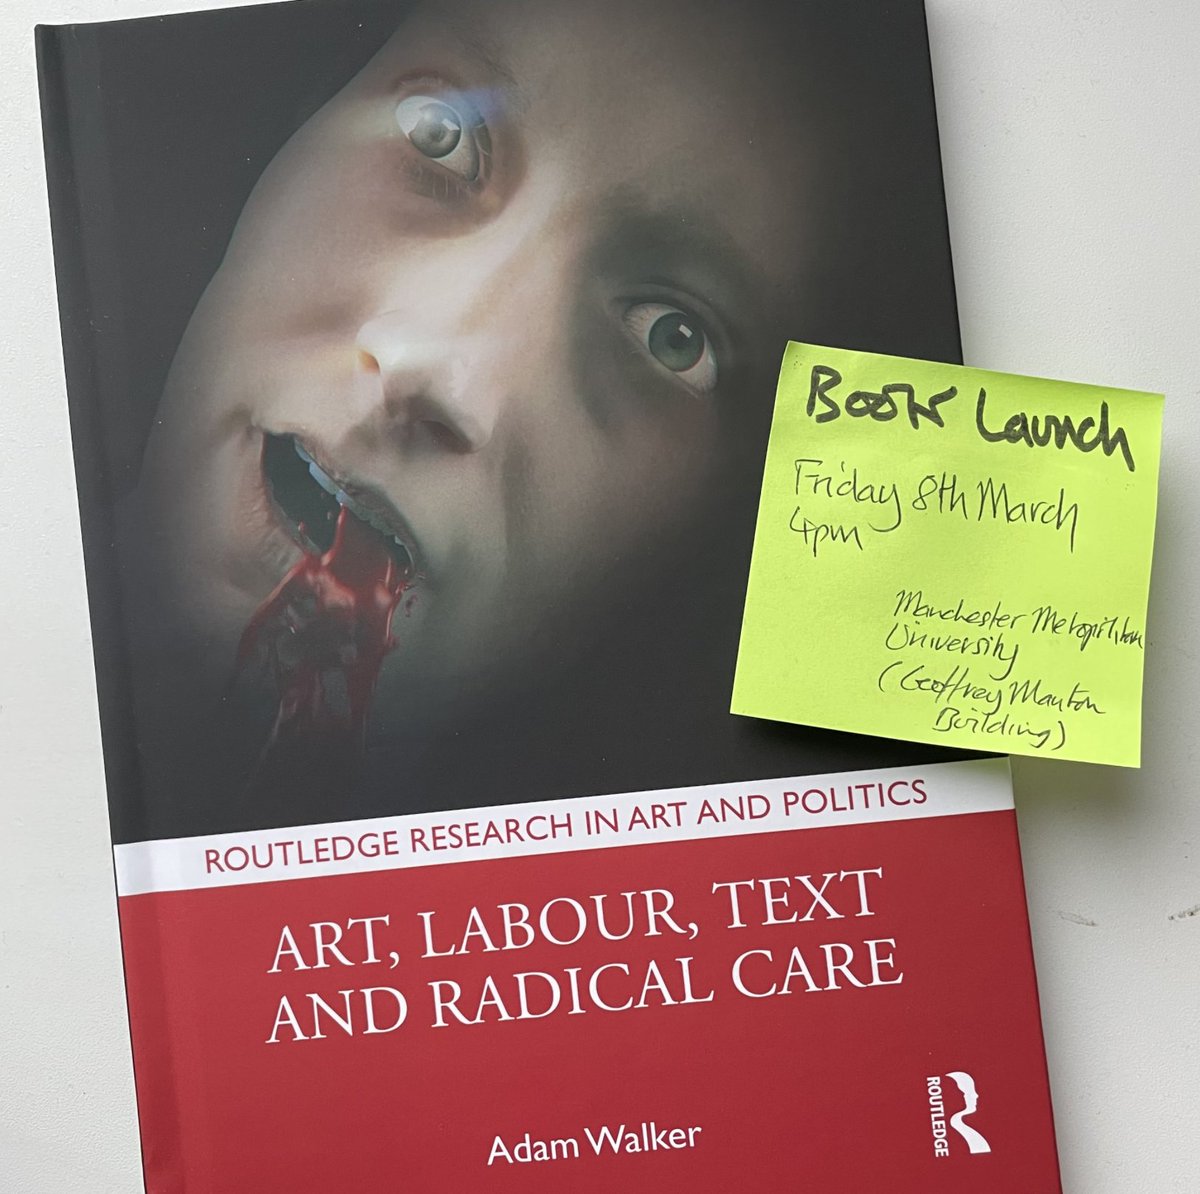 Book launch: Art, Labour, Text and Radical Care Friday 8th March, 16:00-18:00, Manchester Metropolitan University Join us at 4pm on 8th March to celebrate the launch of the new book 'Art, Labour Text and Radical Care' by Dr Adam Walker Book (free) here: eventbrite.co.uk/e/art-labour-t…